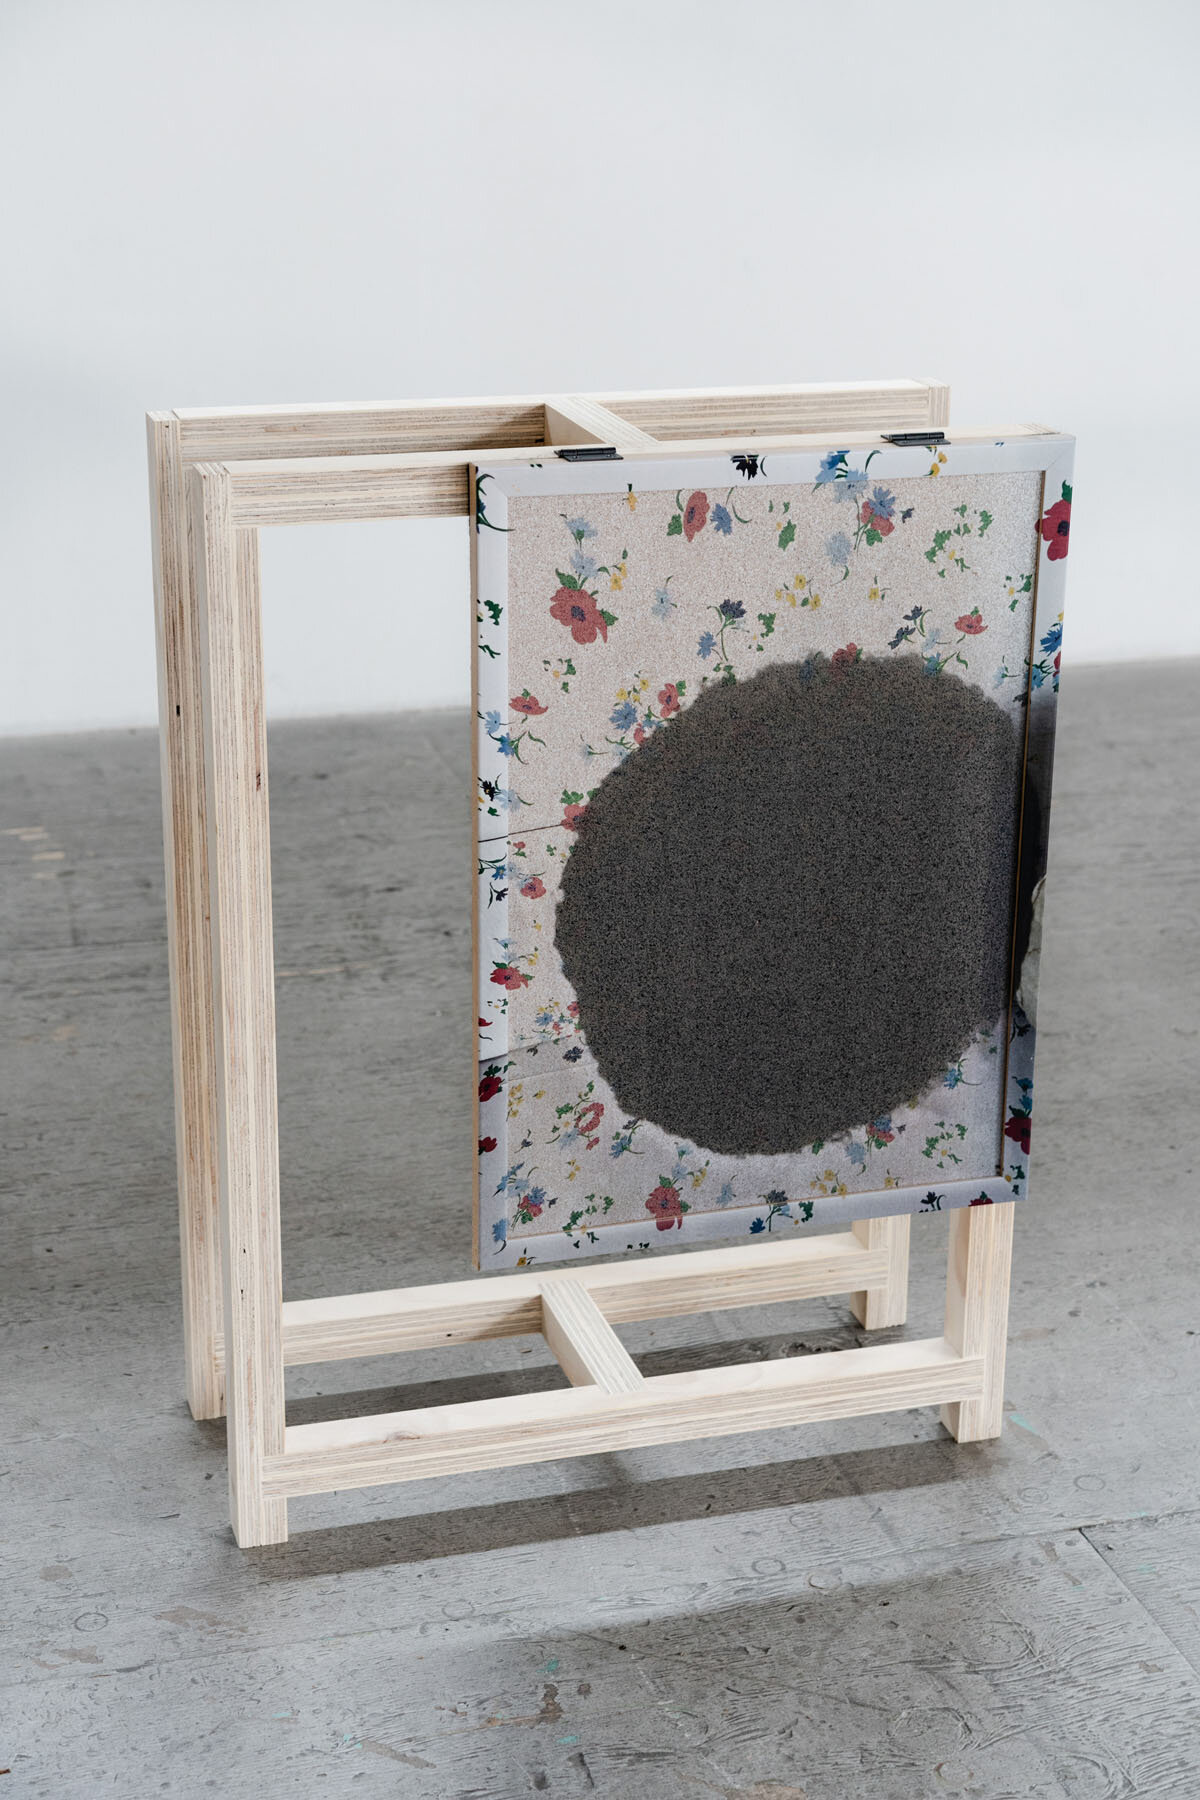   Presentation , 2019, acrylic on framed cork board, wood, hinges, spray paint, geotextile, staples, marker, 31.5 x 24 x 10.5 inches 